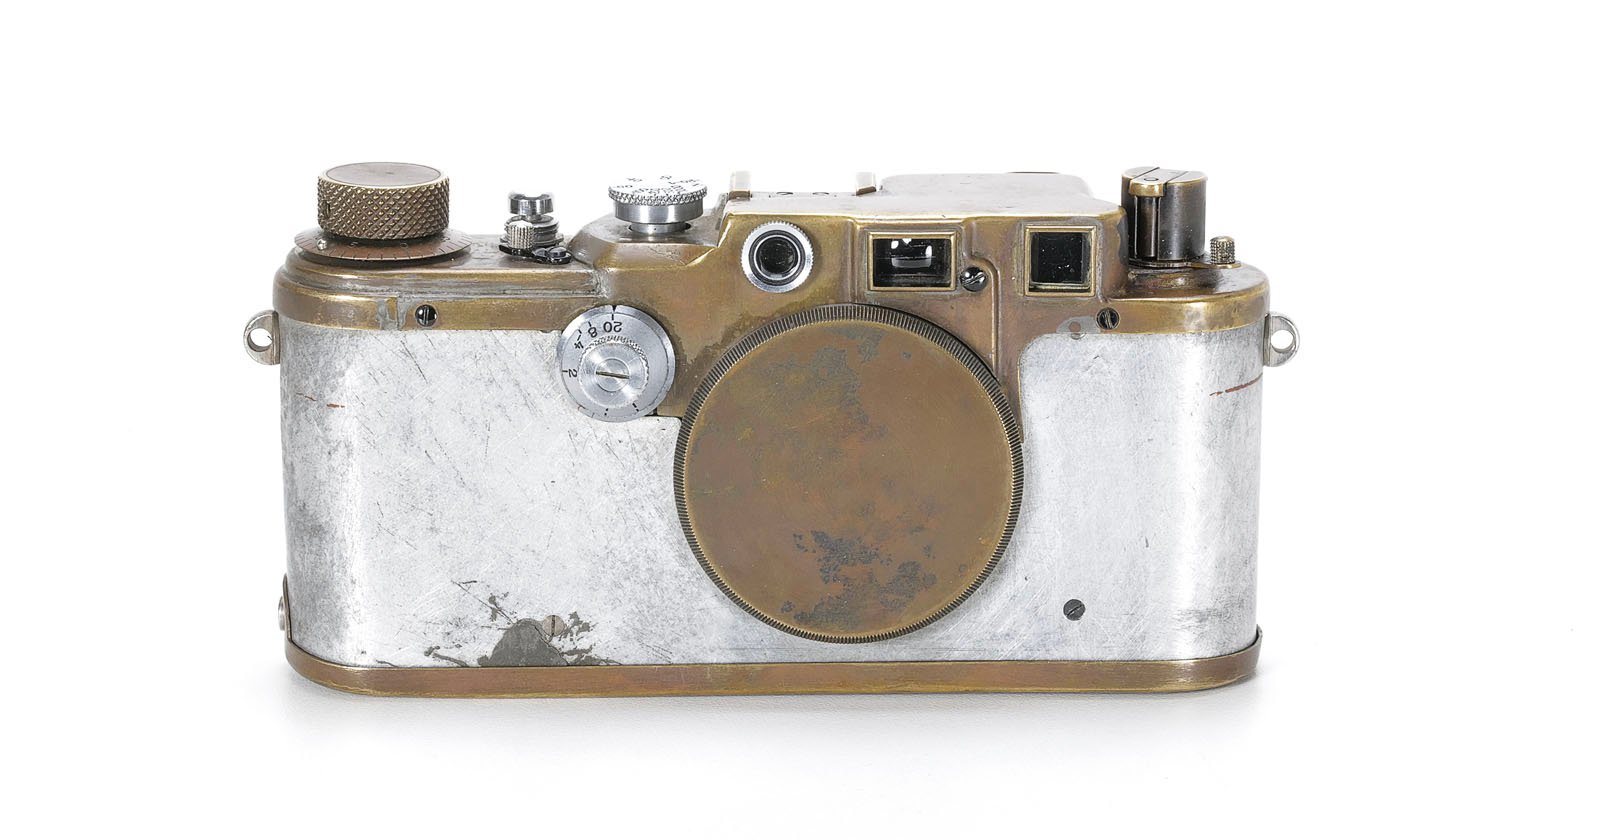 The First-Ever Die-Cast Leica Prototype is Coming to Auction